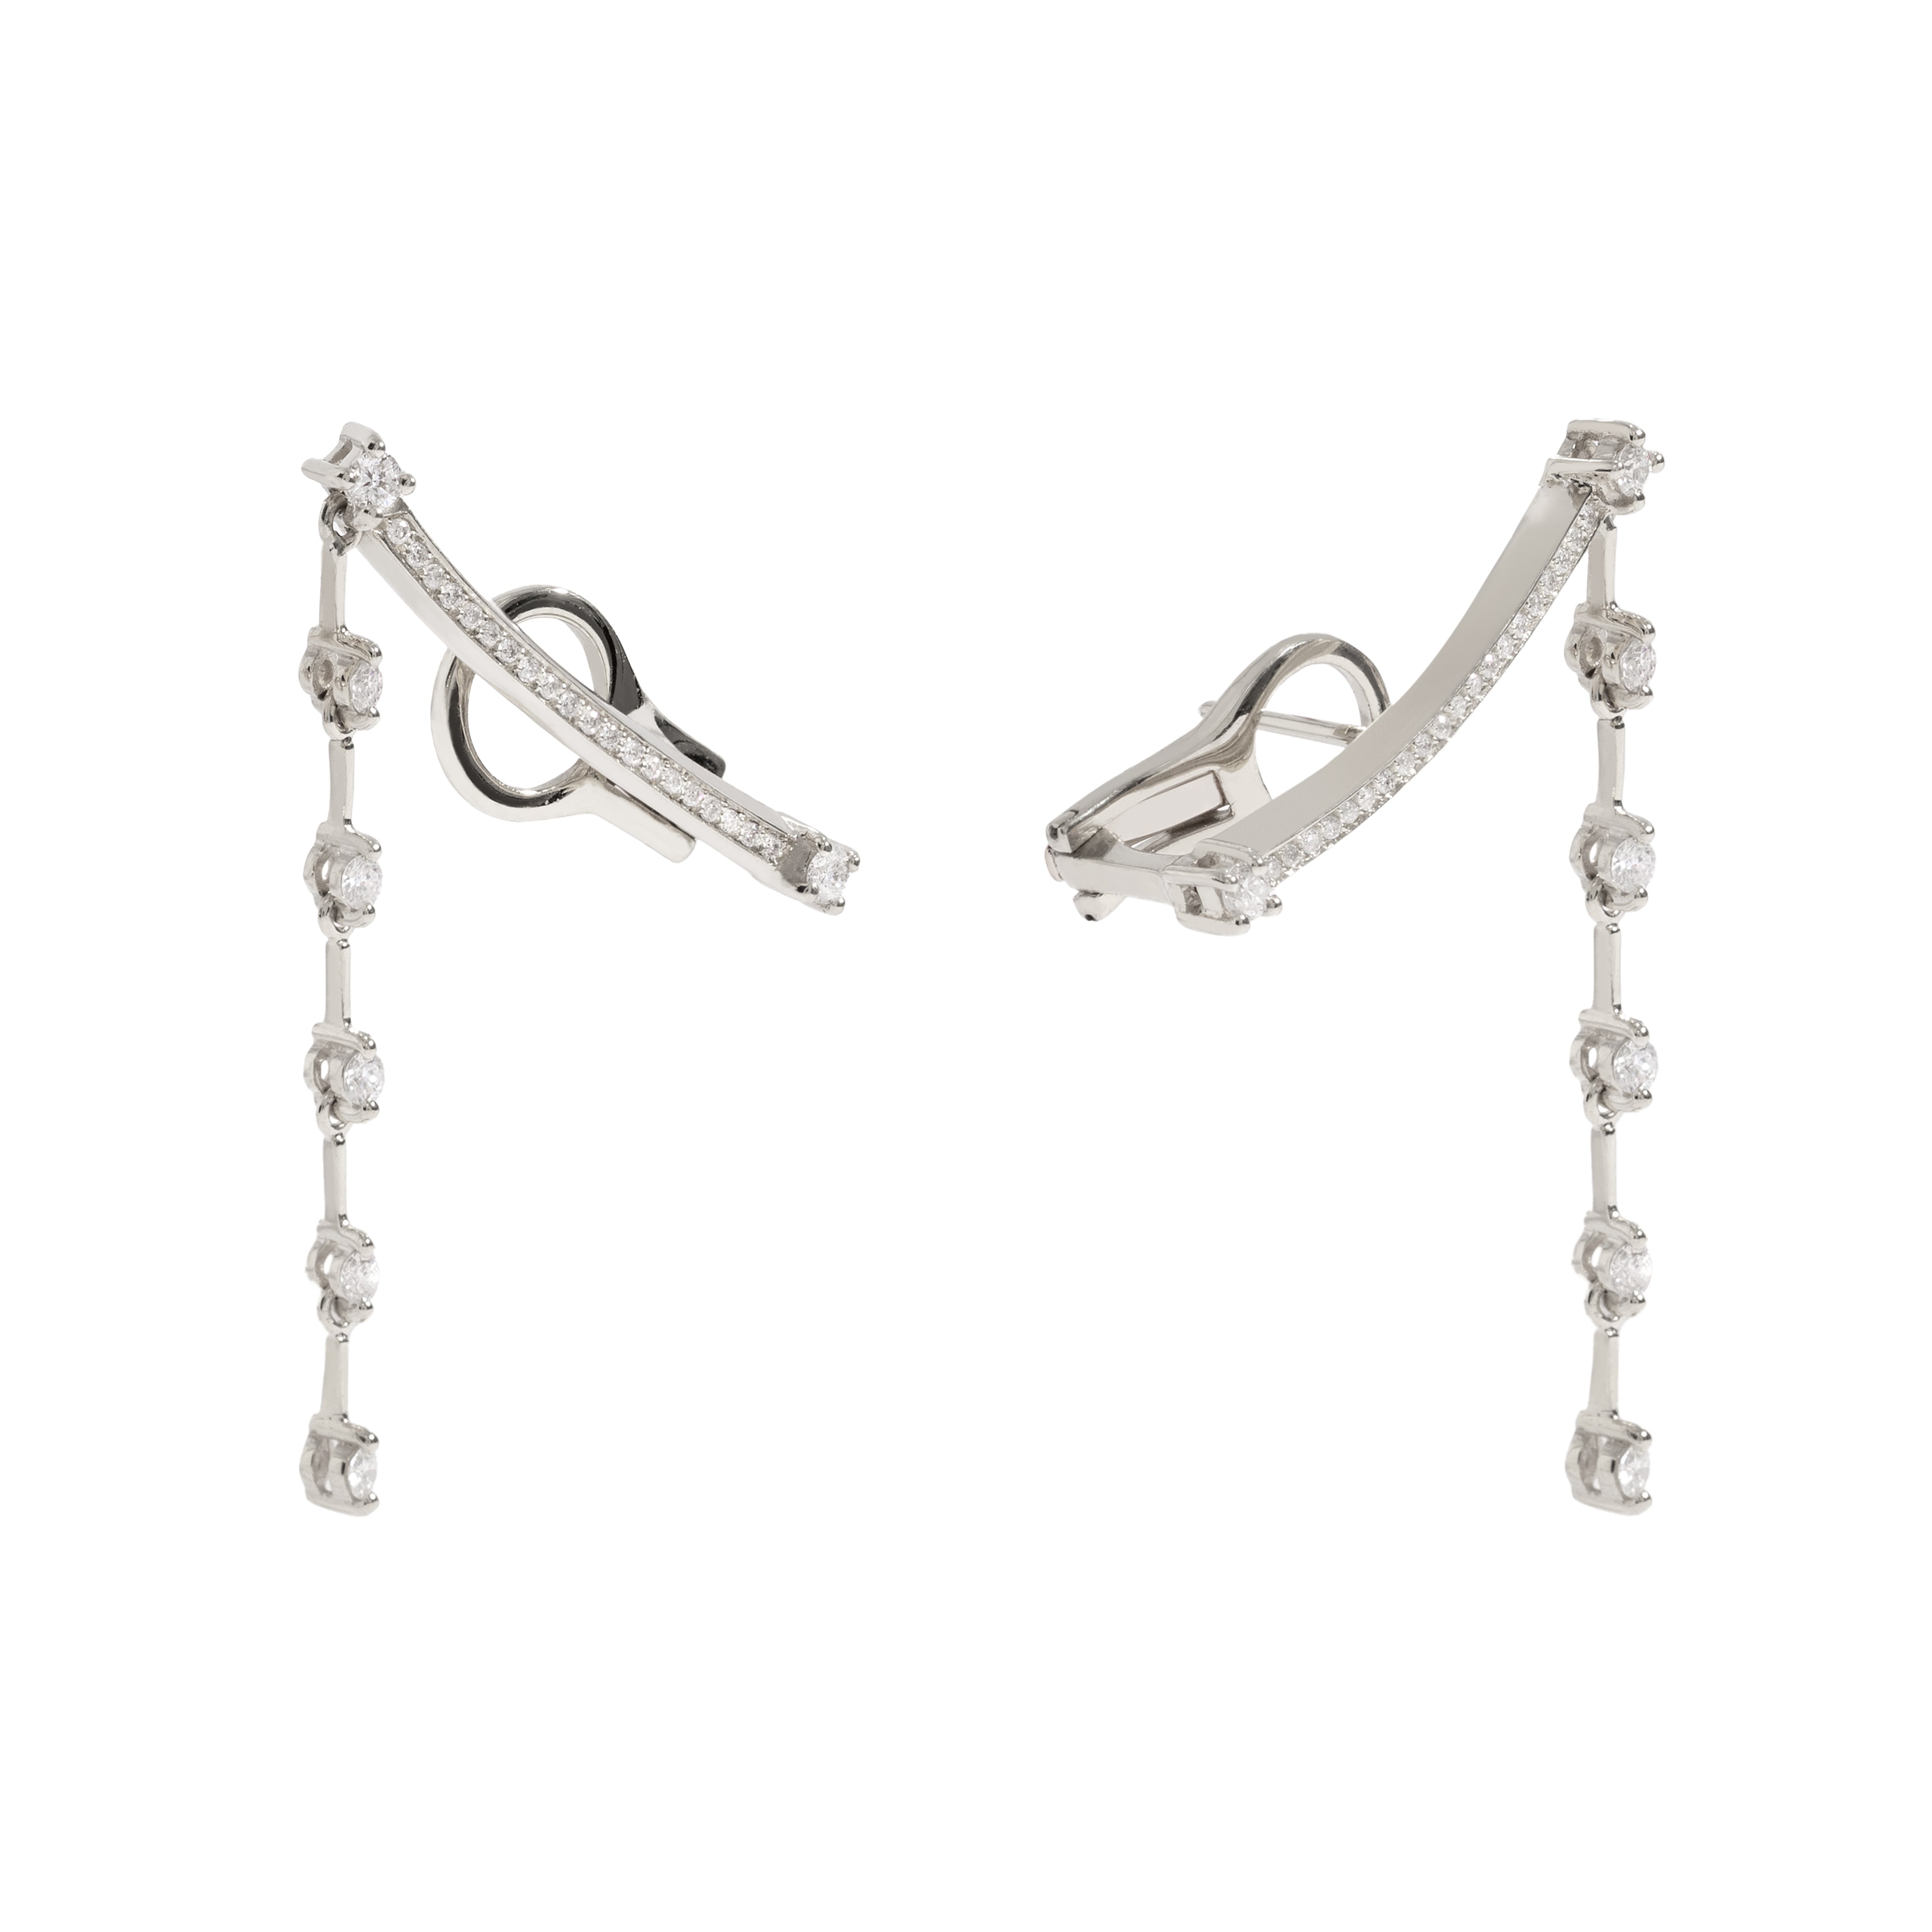 NEW VINTAGE EARRING IN 18K WHITE GOLD WITH DIAMOND